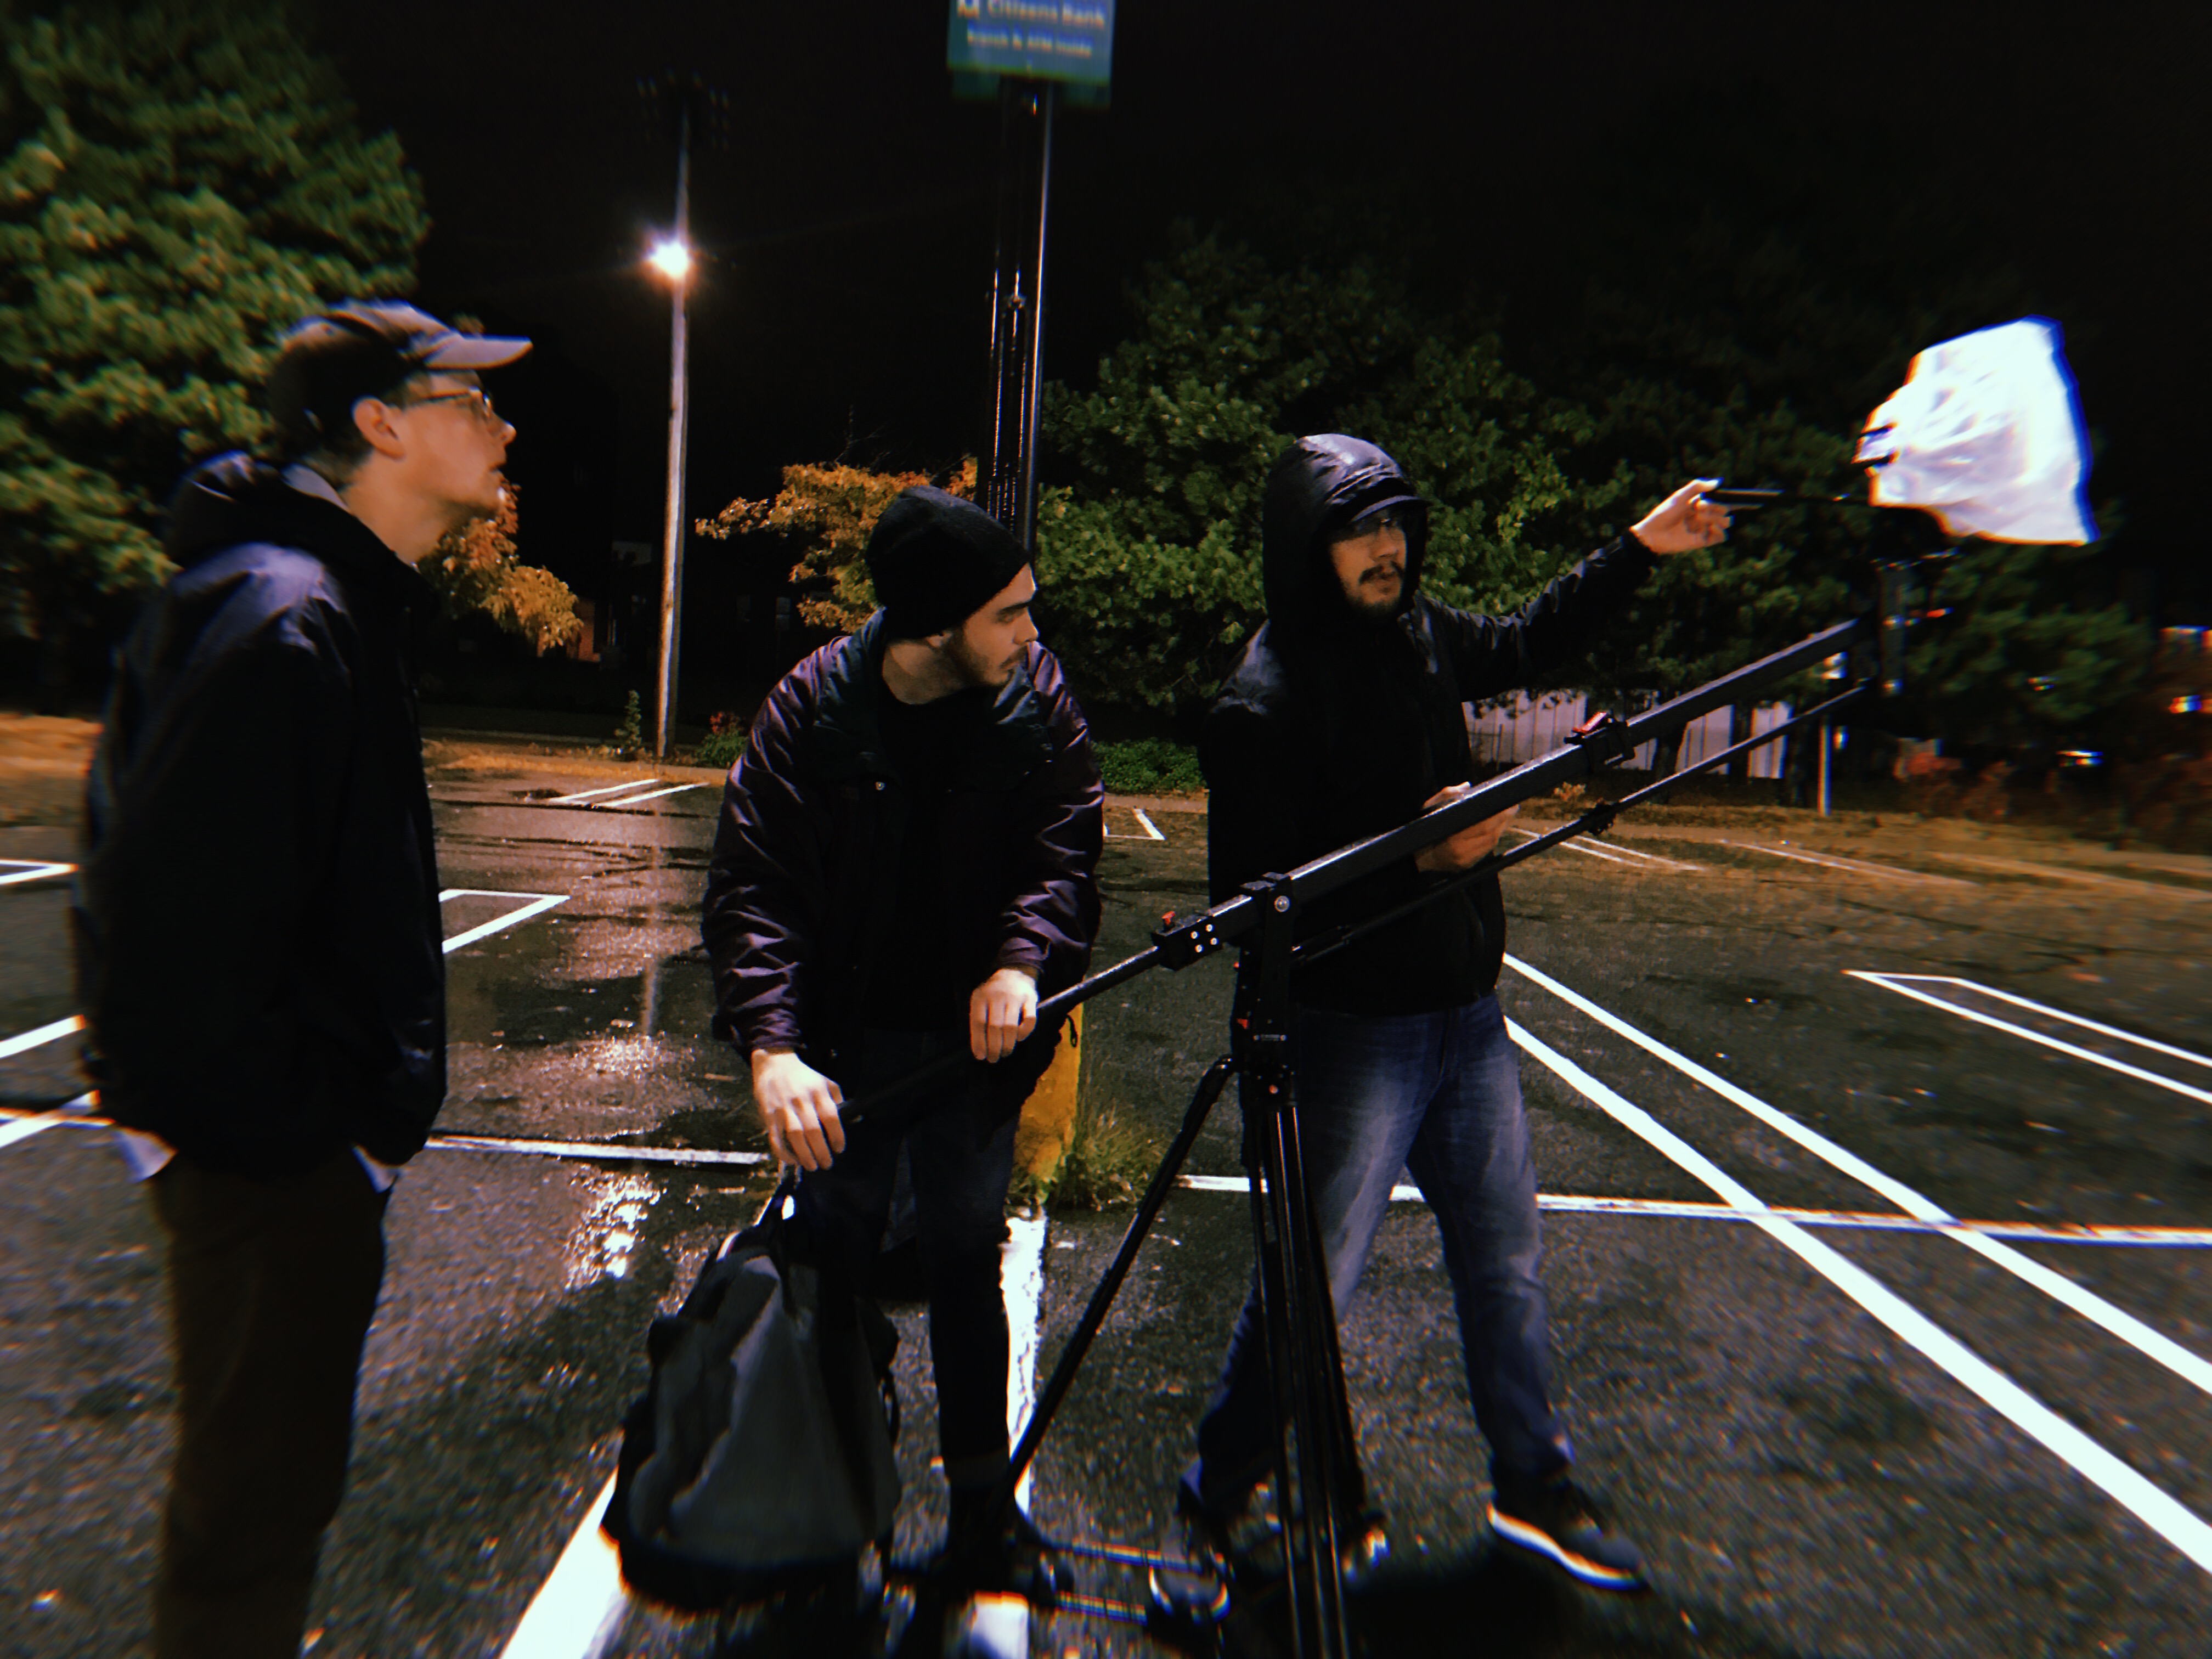 three film students set up a camera to record in an empty parking lot at night in the rain